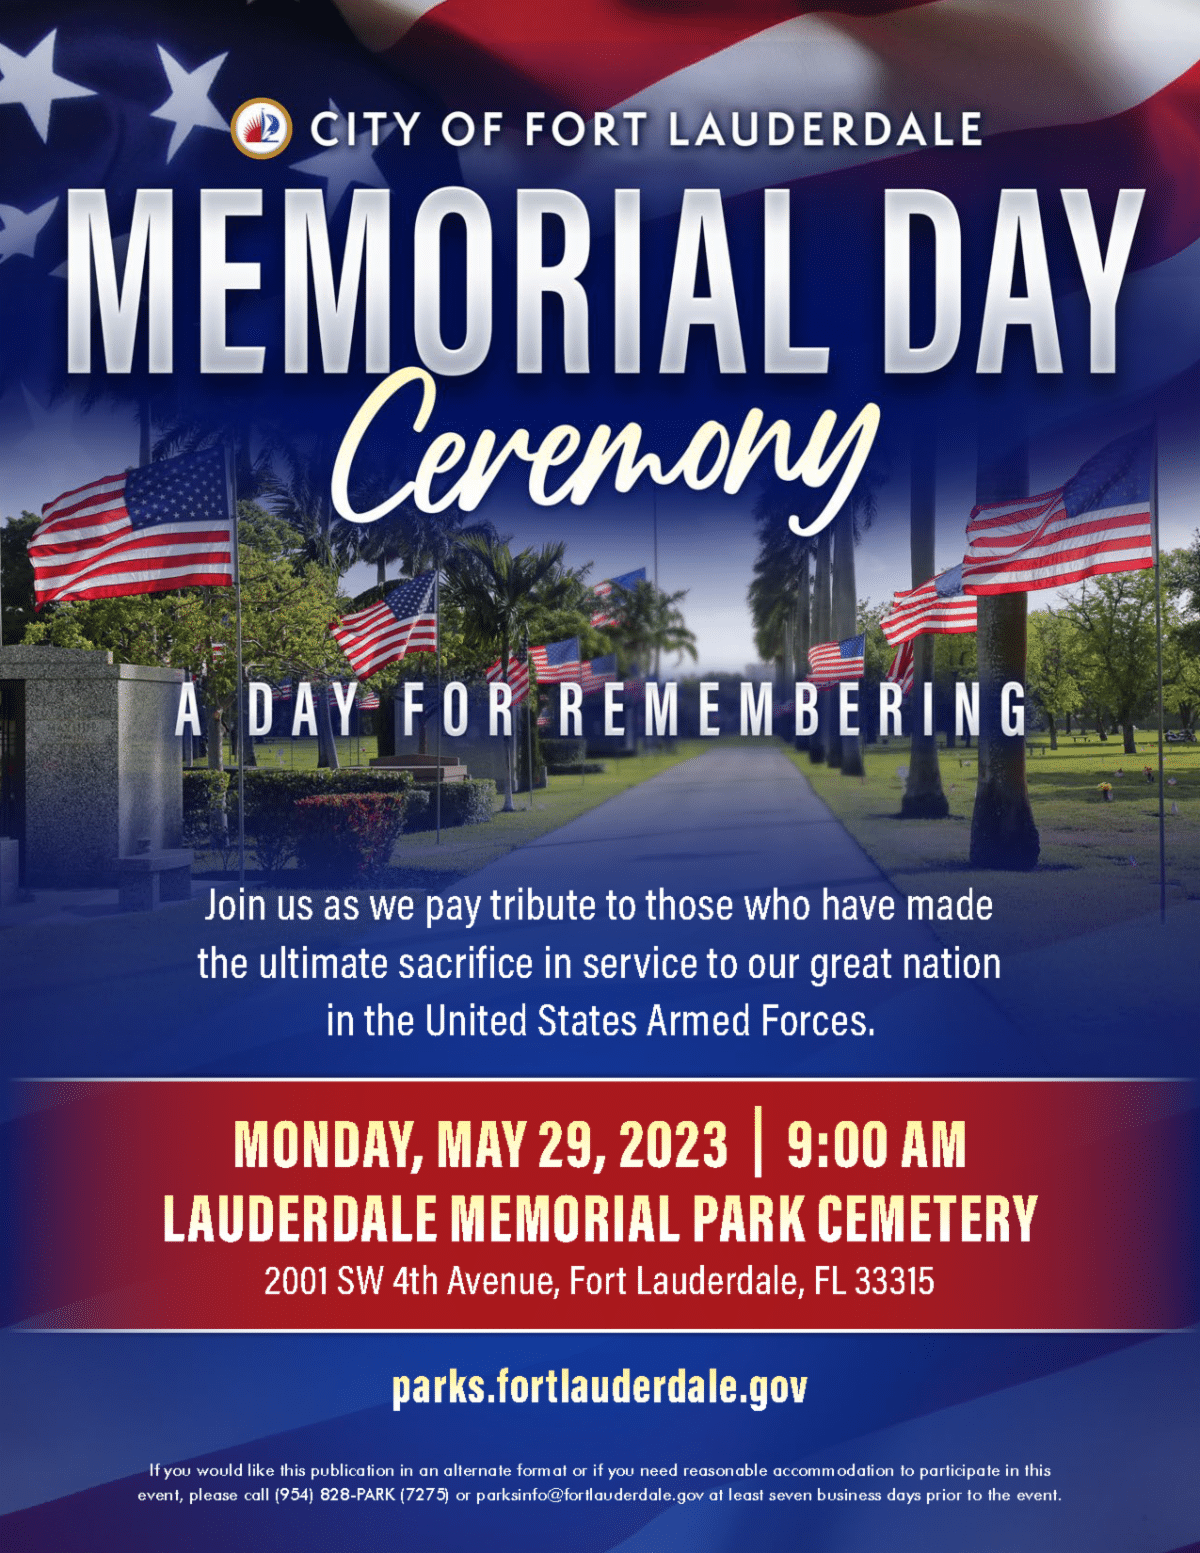 Memorial Day Ceremony - City of Fort Lauderdale - May 29, 2023